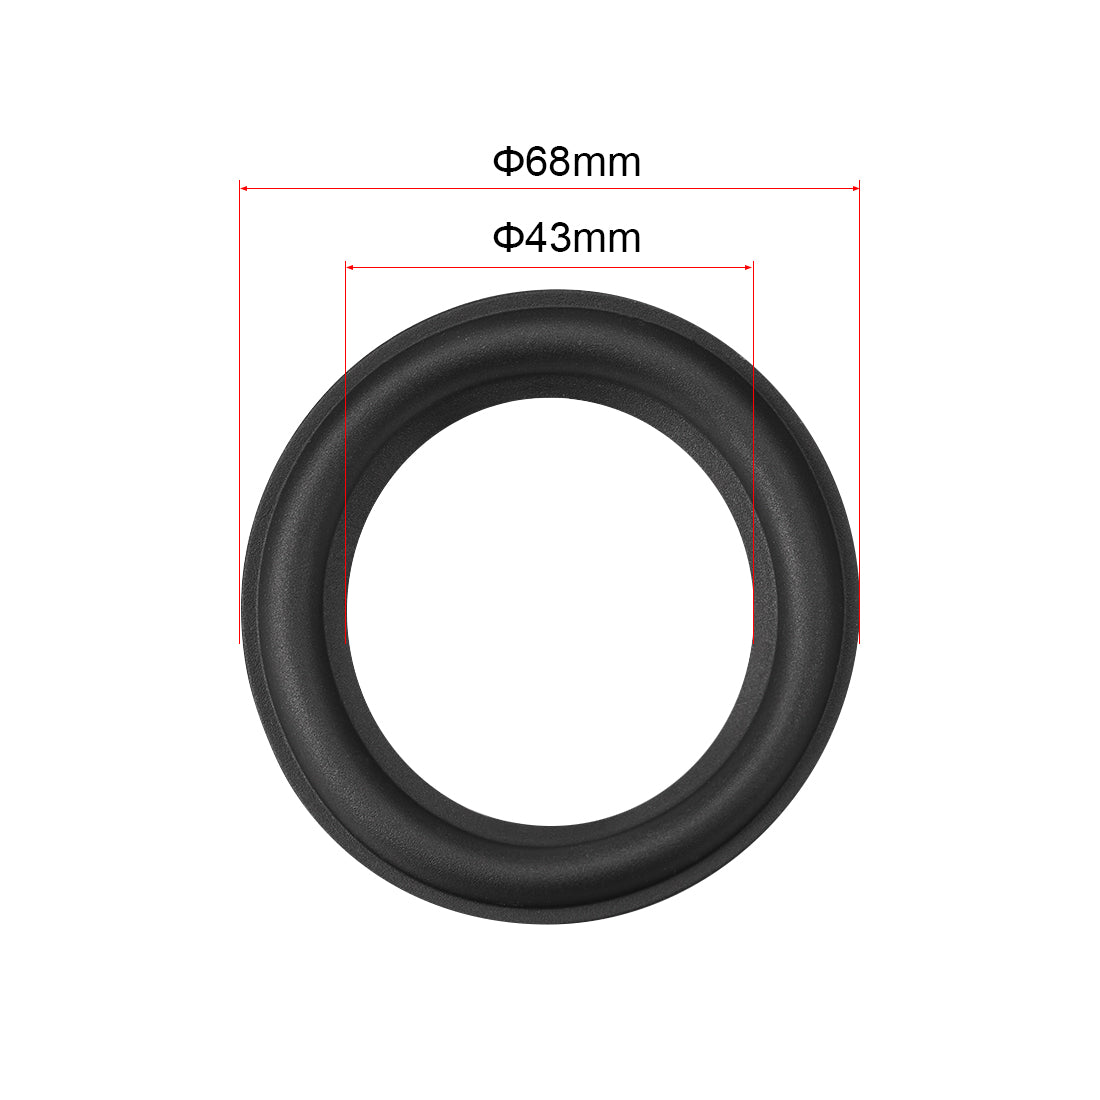 uxcell Uxcell 2.75" 2.75 inch Speaker Rubber Edge Surround Rings Replacement Part for Speaker Repair or DIY 2pcs